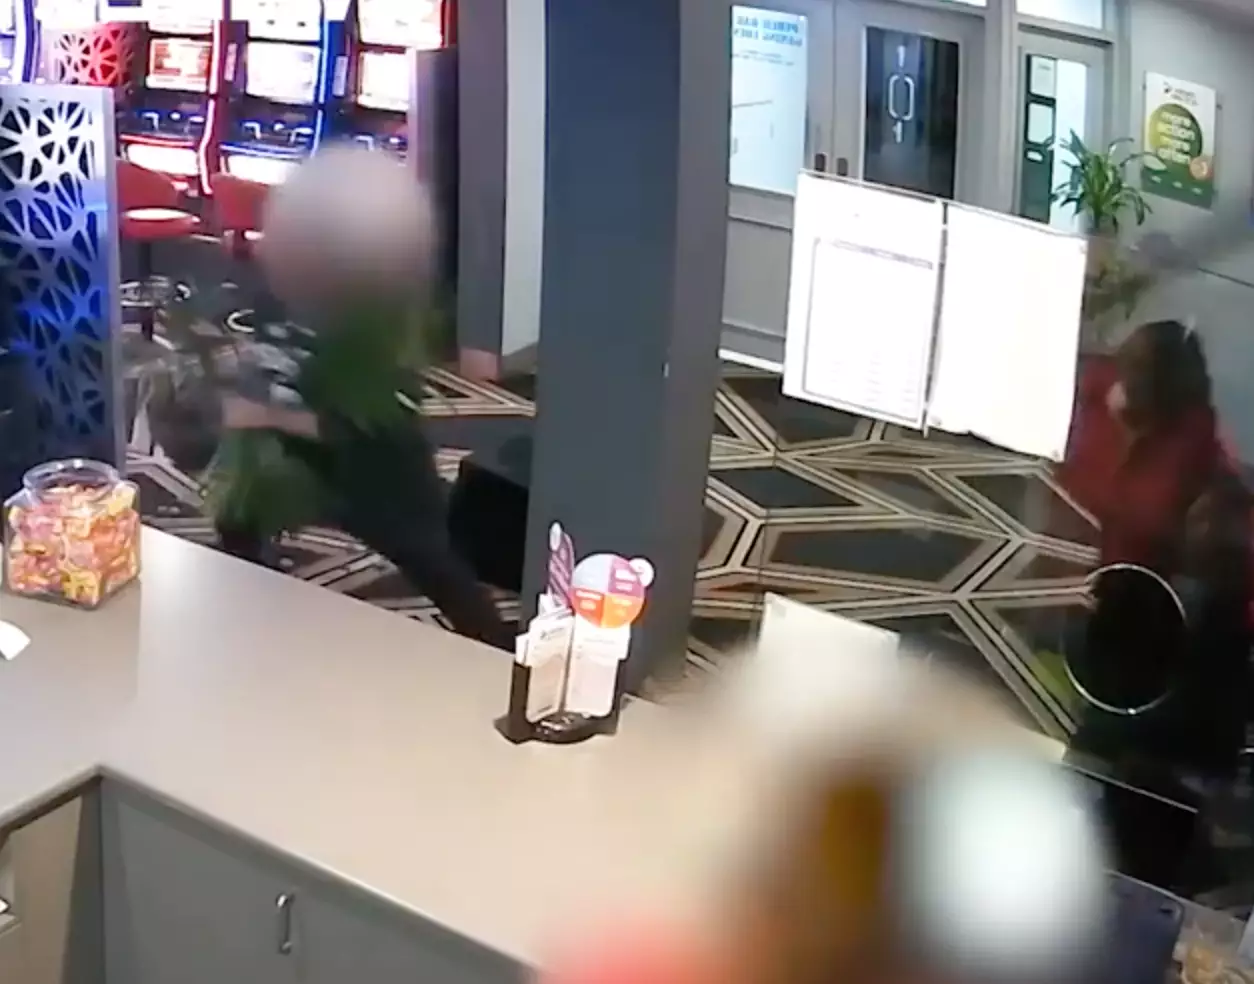 He even picked up a pot plant to stop the robbery.